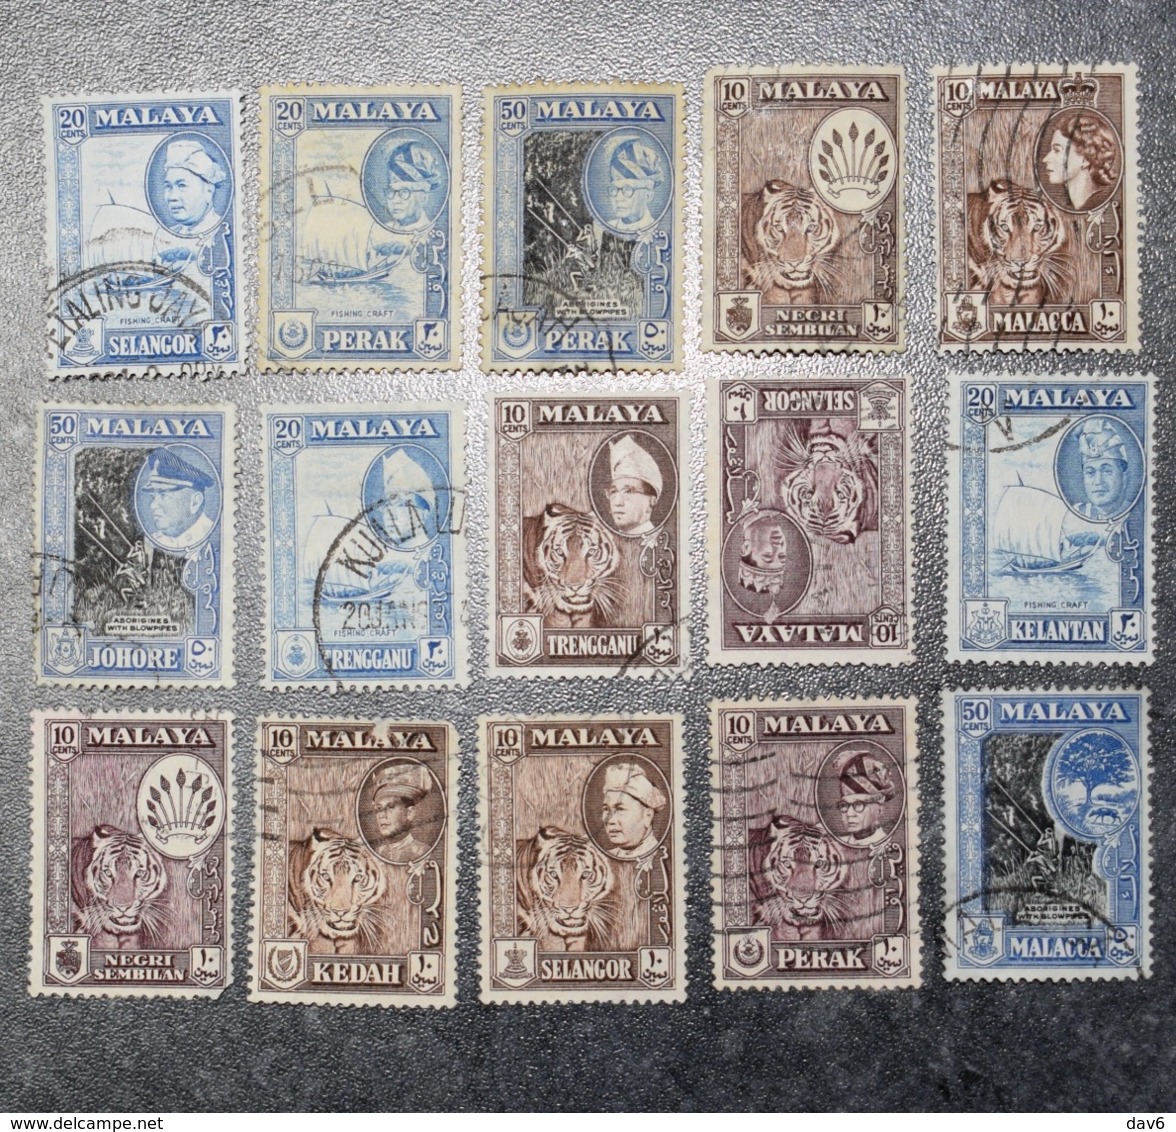 MALAYSIA  STAMPS  States  1957   Used And A Few MM      ~~L@@K~~ - Federation Of Malaya